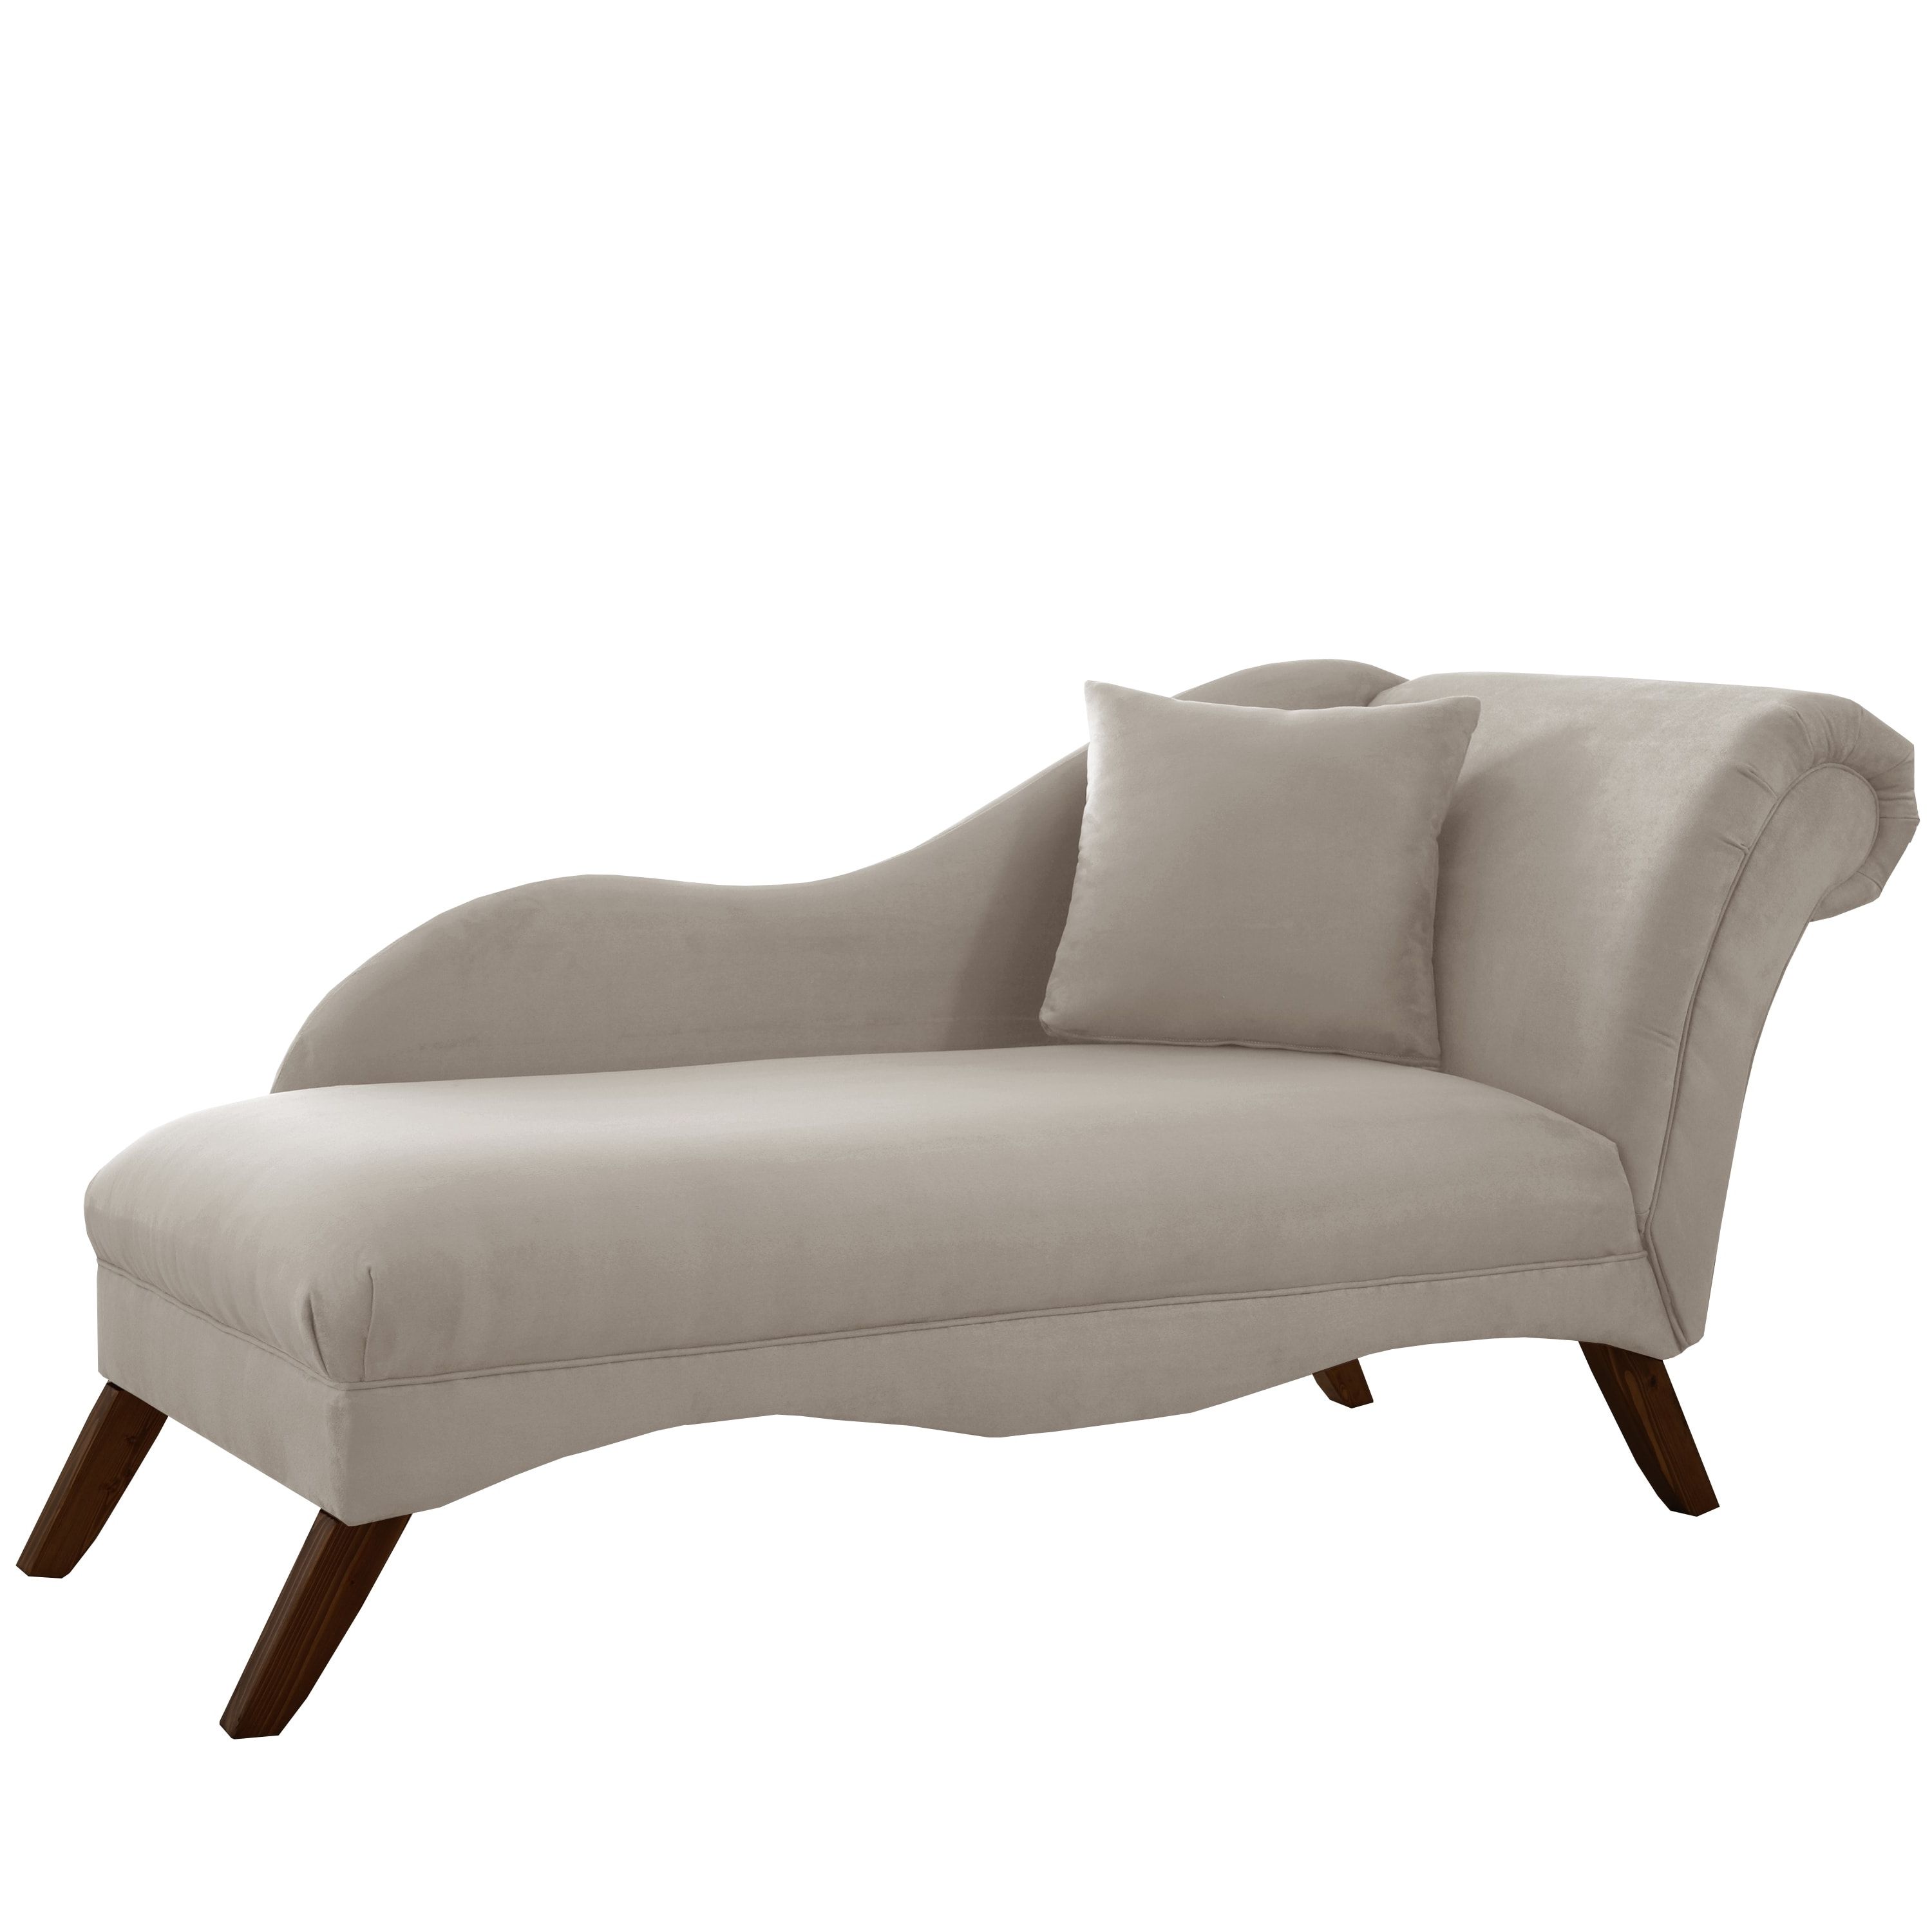 Skyline Furniture Chaise Lounge In Velvet Light Grey – Free For Well Known Skyline Chaise Lounges (Photo 14 of 15)